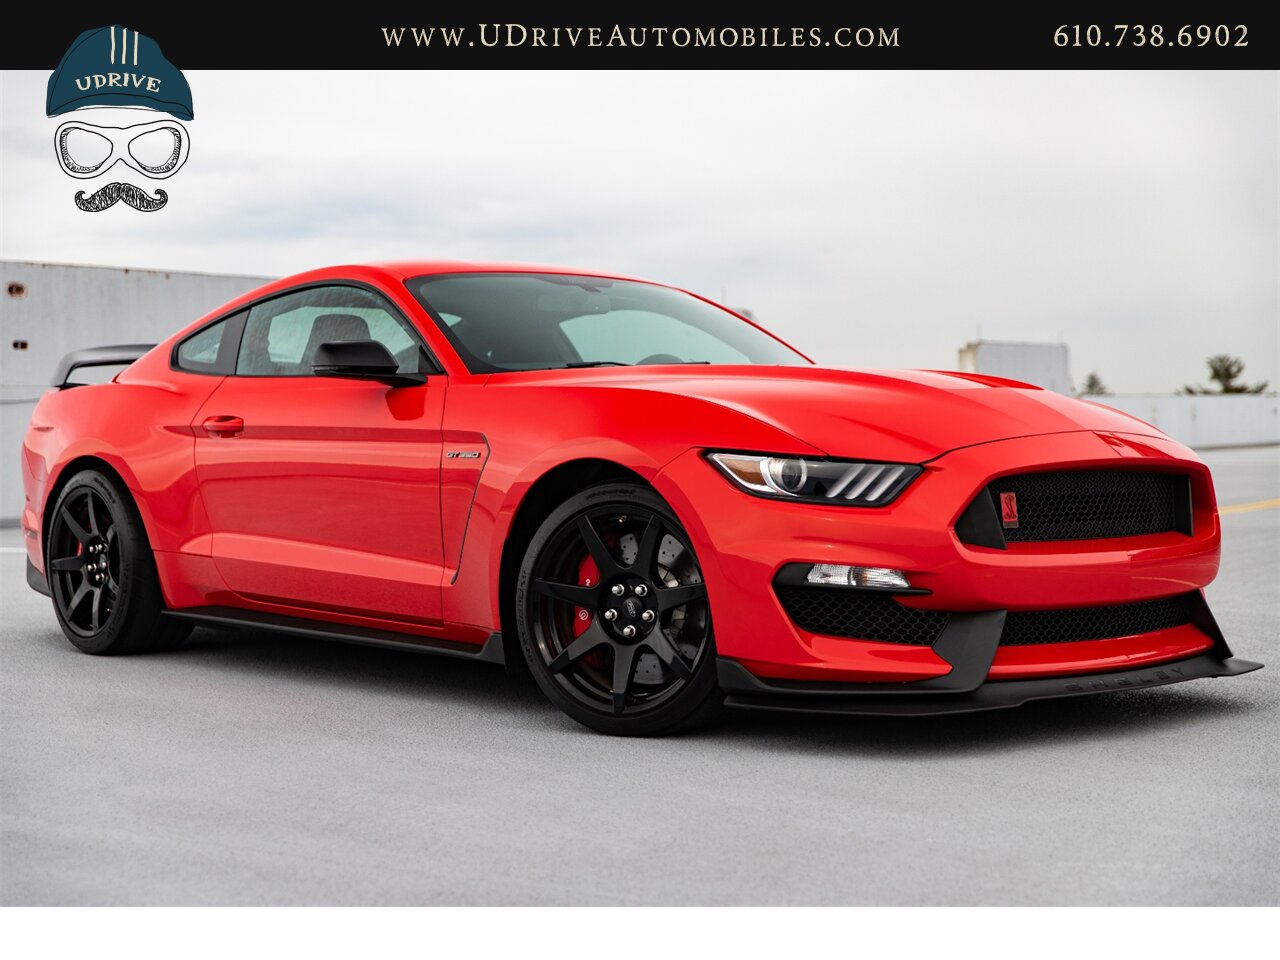 2016 Ford Mustang Shelby GT350R 3k Miles Electronics Pkg  1 of 32 Race Red Produced for USA As New - Photo 3 - West Chester, PA 19382